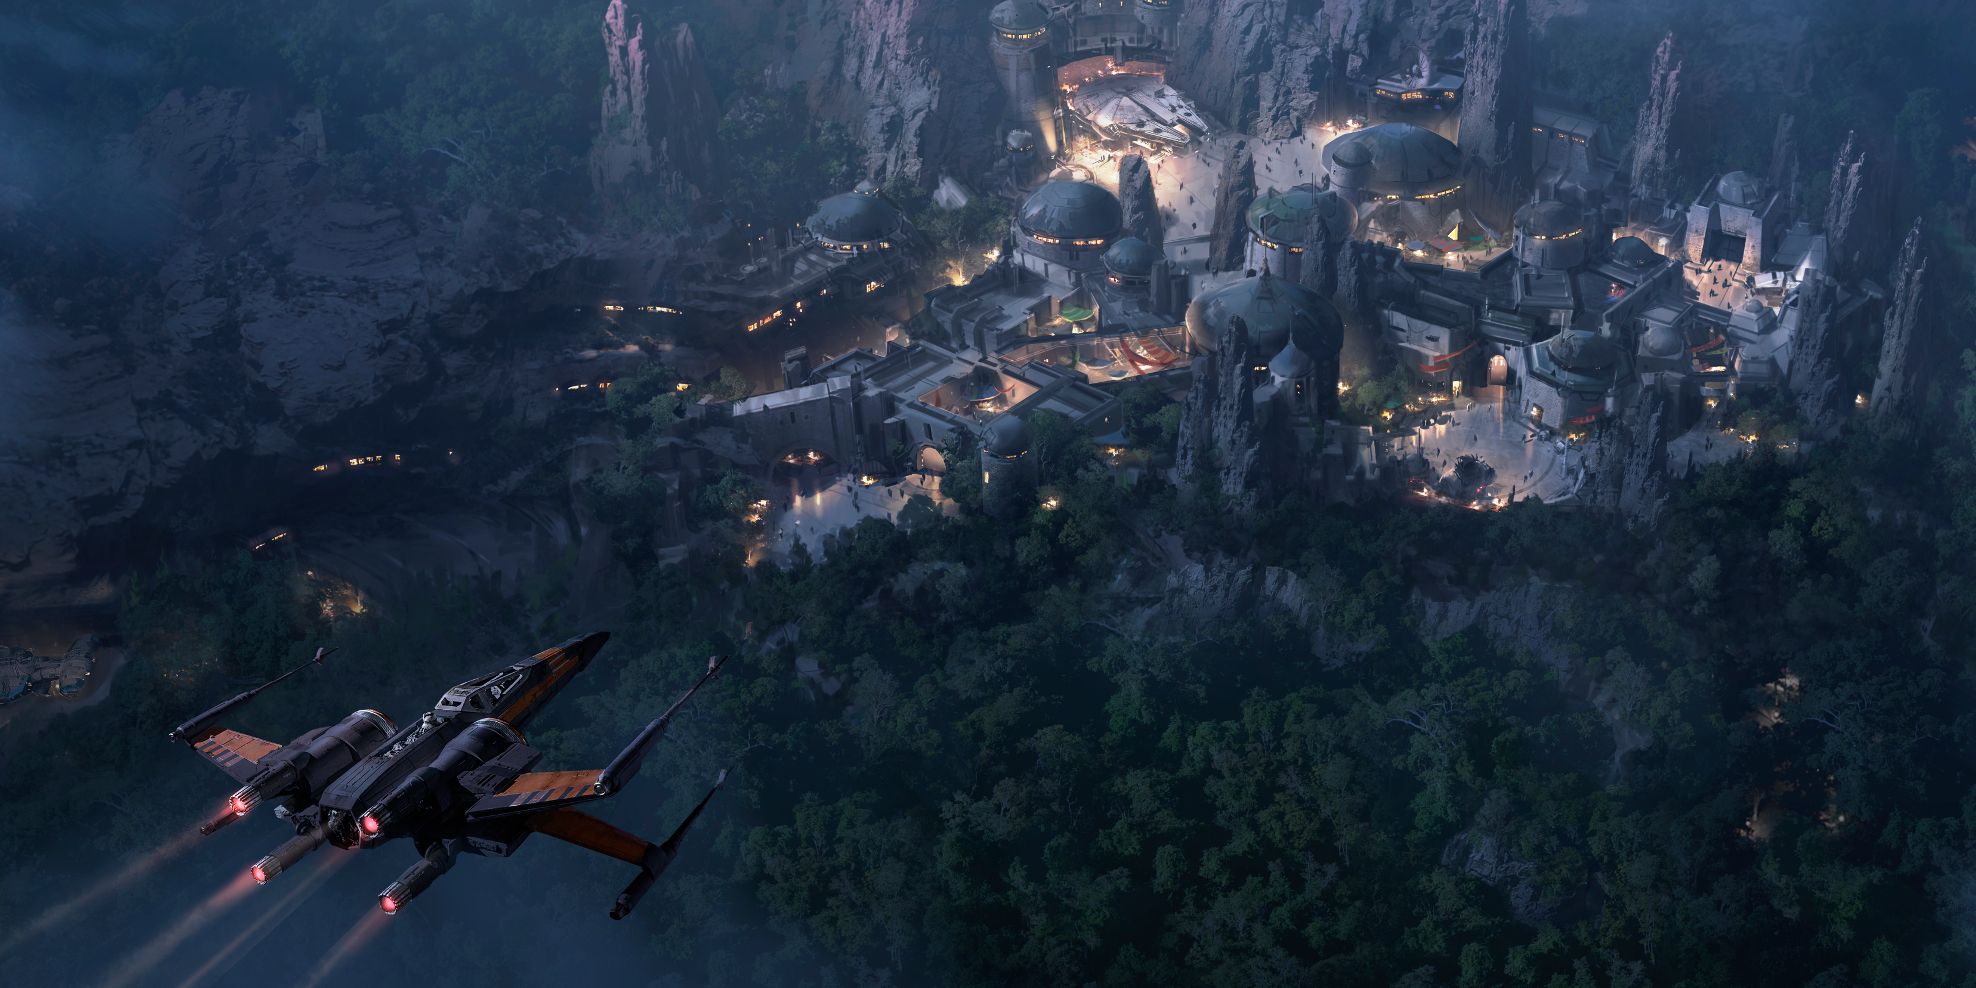 Star Wars Land at night concept art - cropped